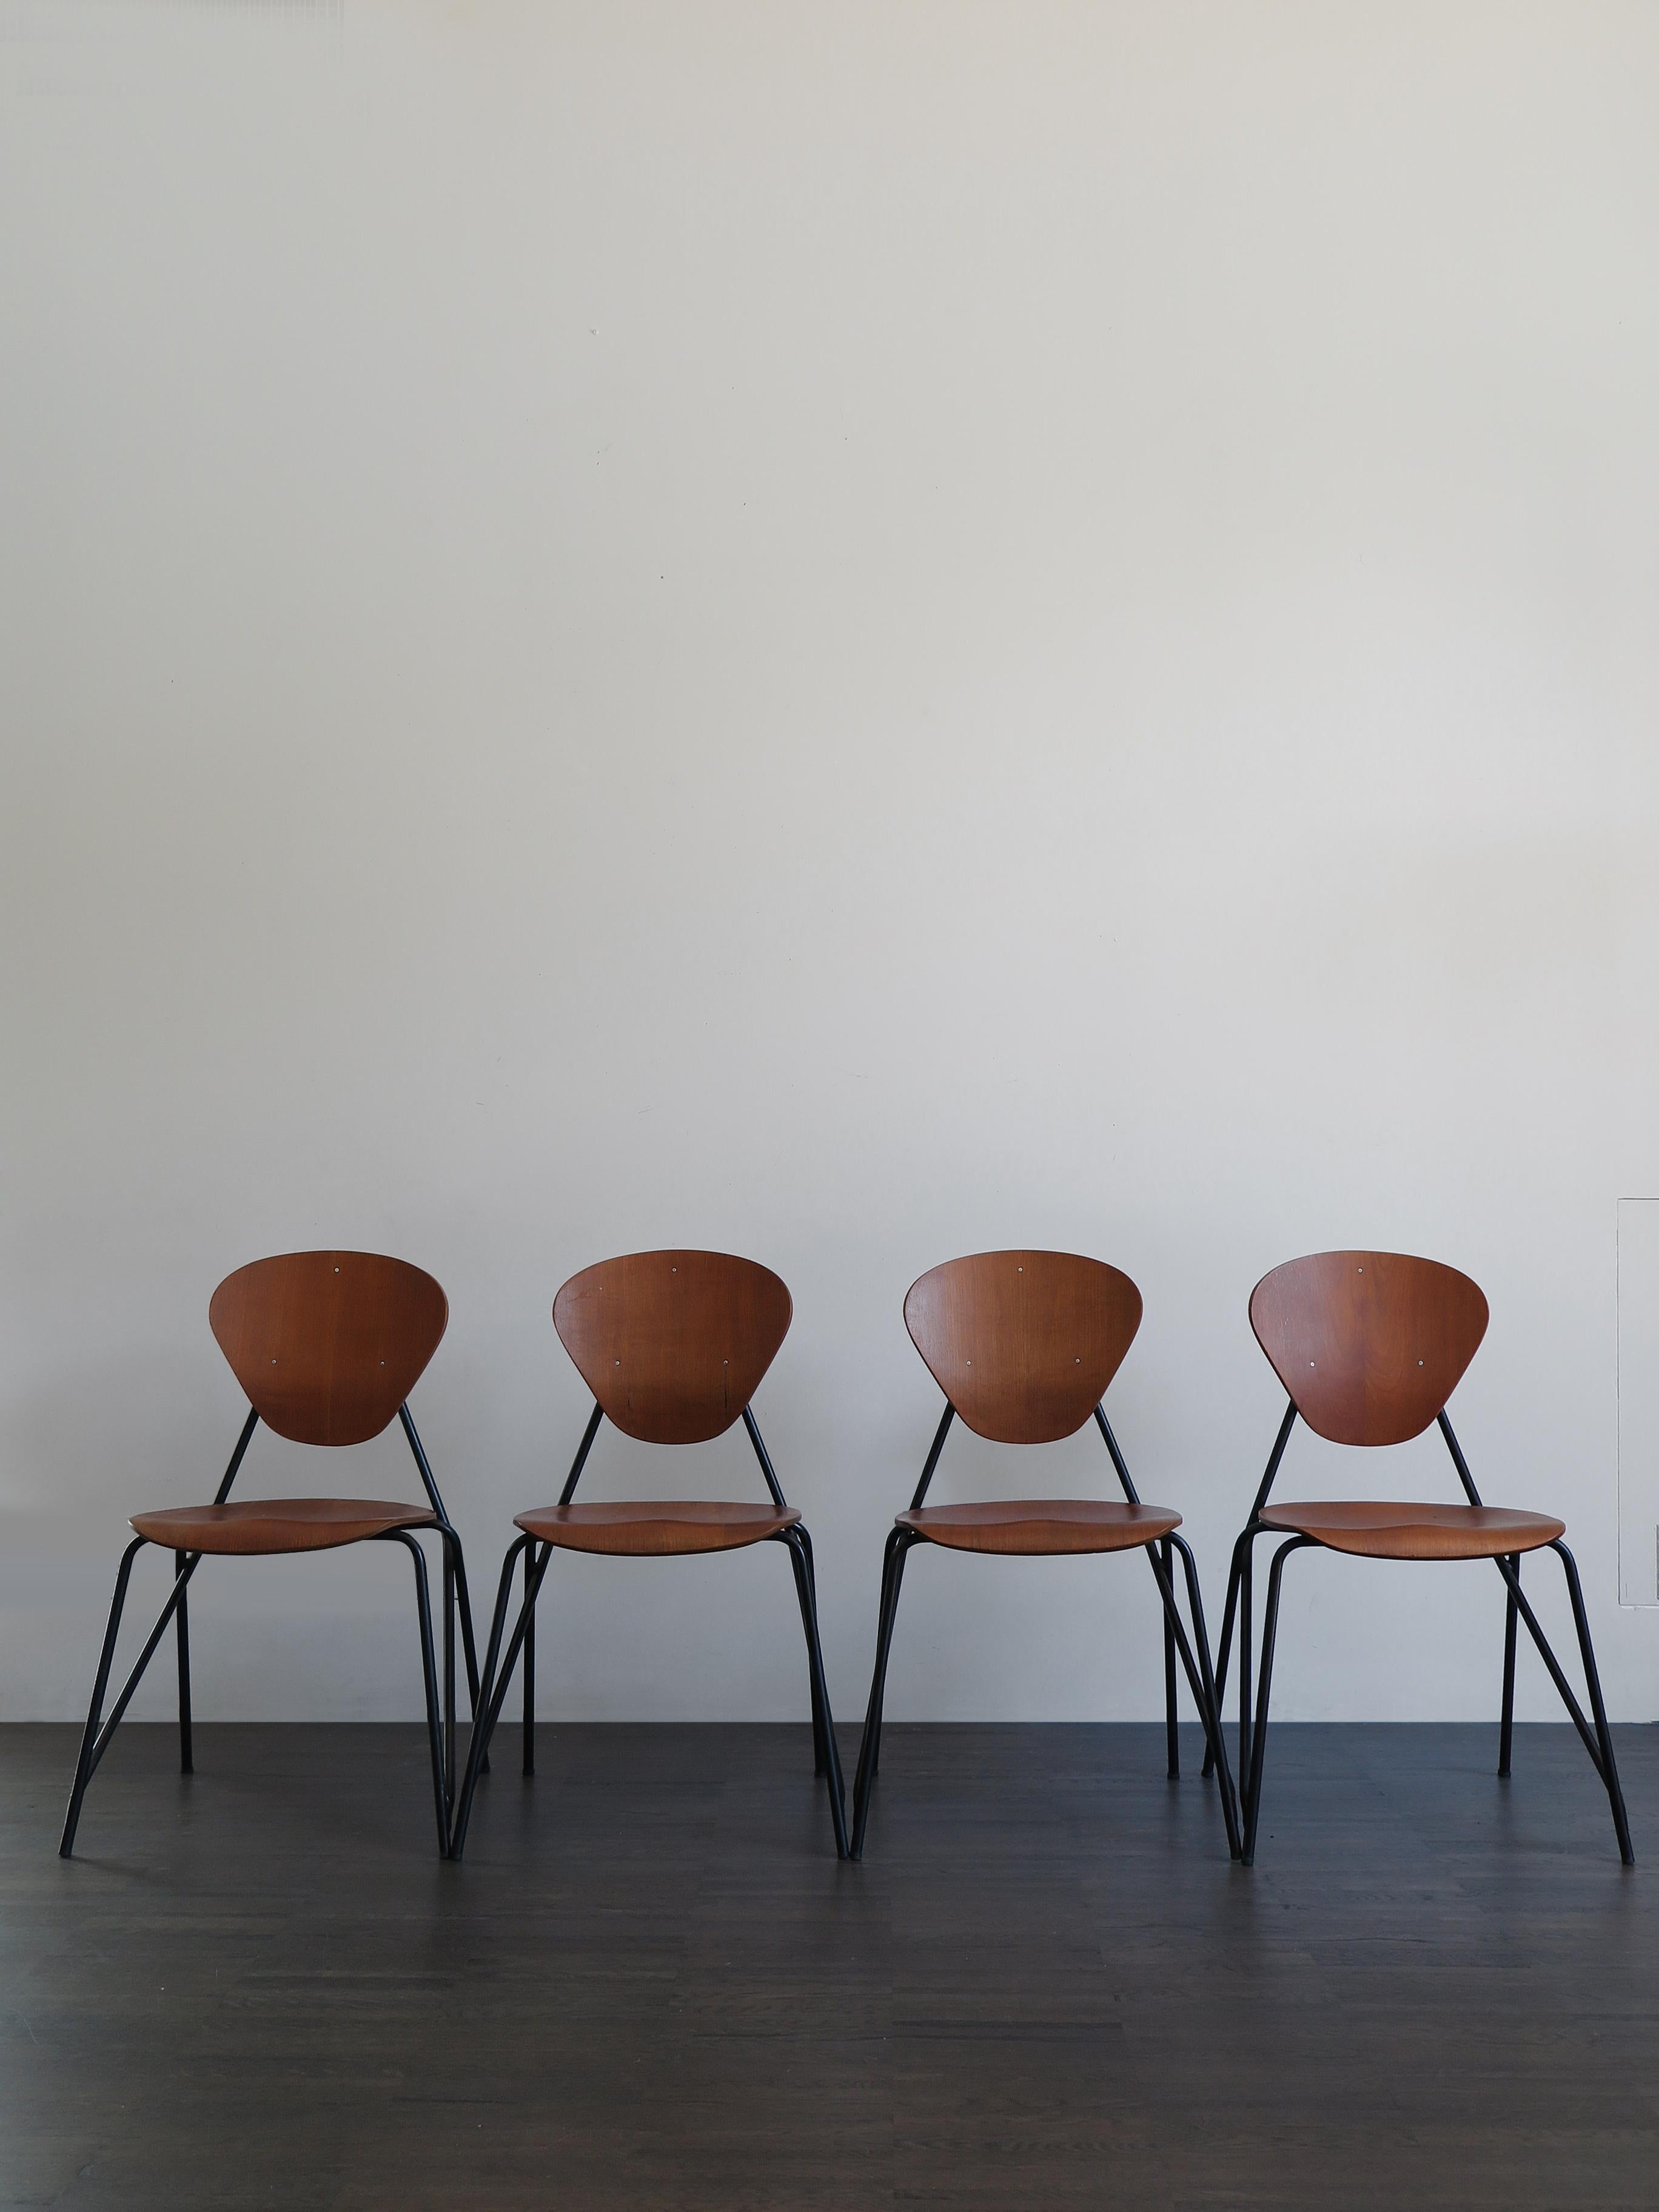 Set of four italian Mid-Century Modern design stackable dining chairs, shaped and curved teak plated plywood and structure in painted tubular steel, produced by Isa from 1960, original label of the ISA.

Please note that the chairs are original of